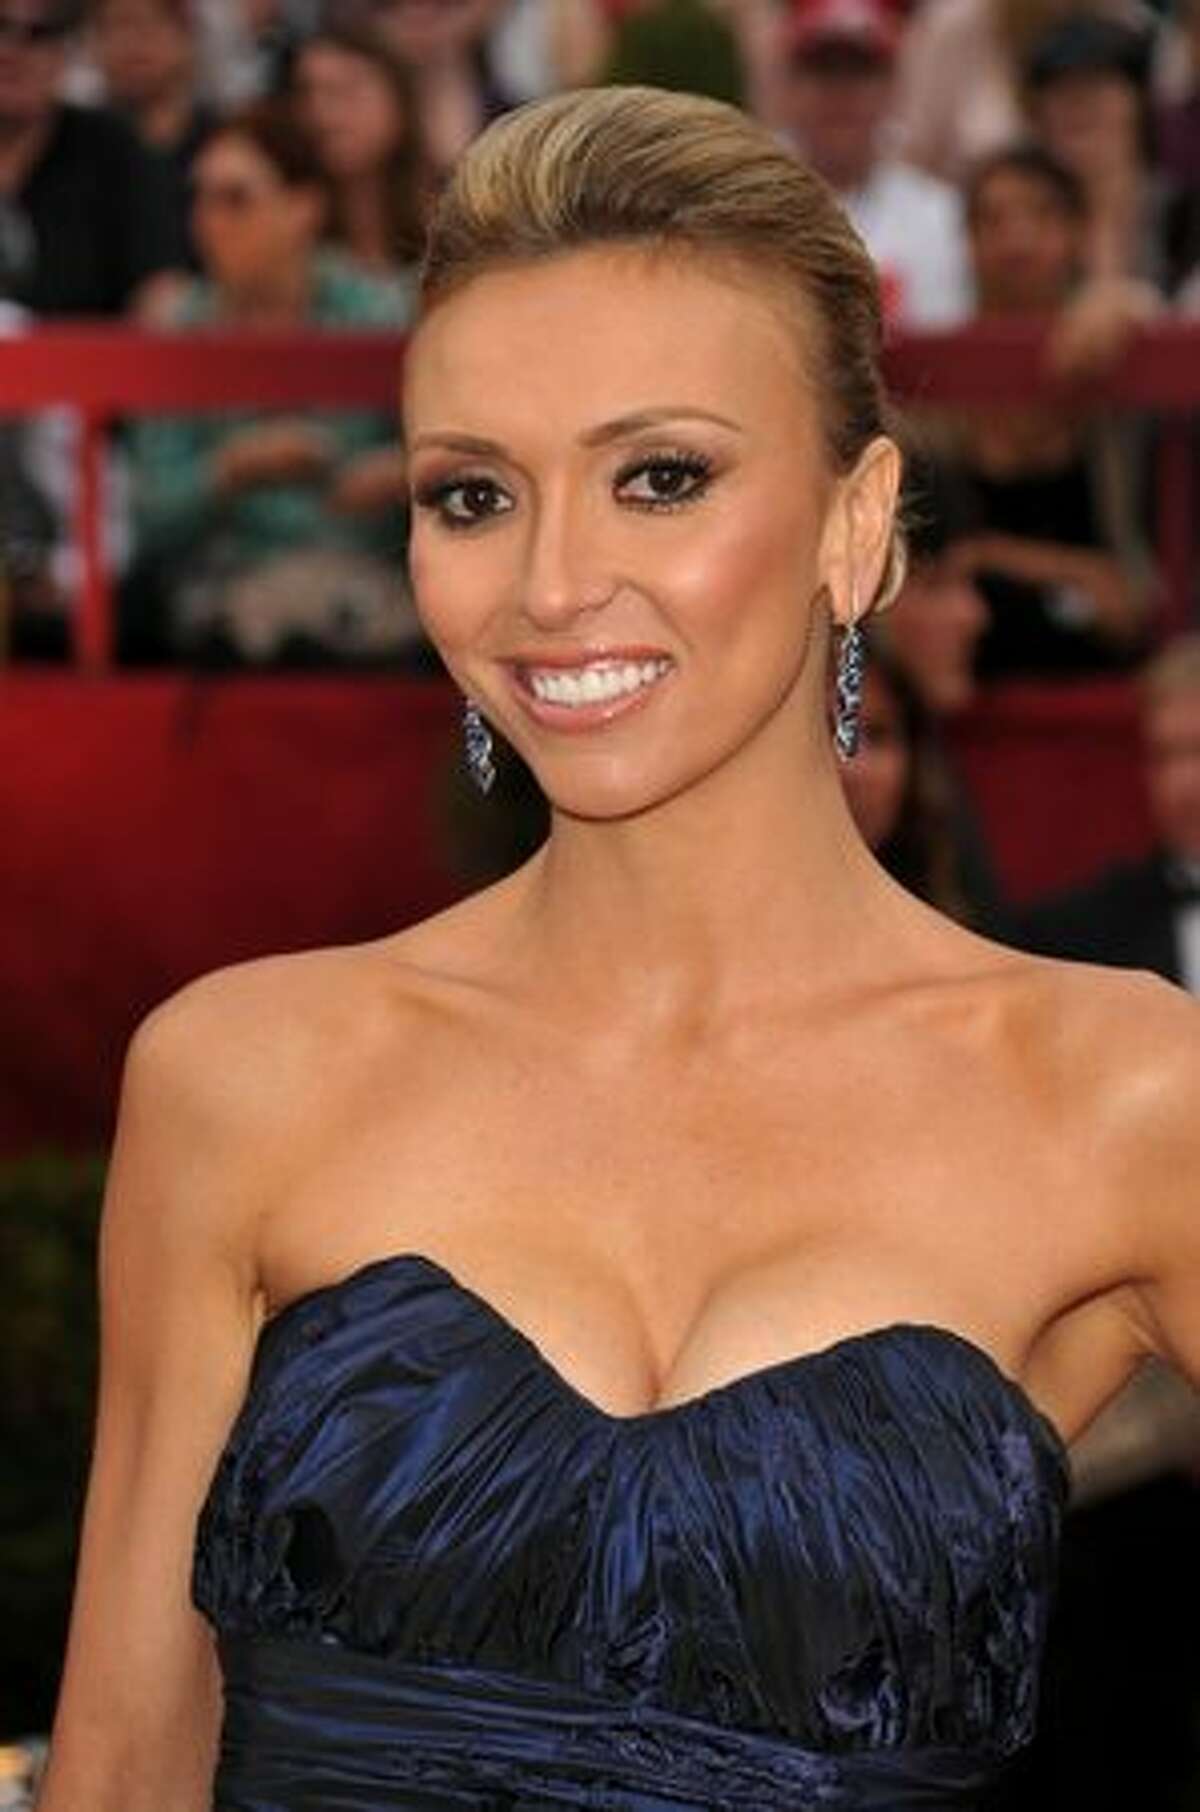 TV personality Giuliana Rancic arrives at the 82nd Annual Academy Awards held at Kodak Theatre in Hollywood, California.